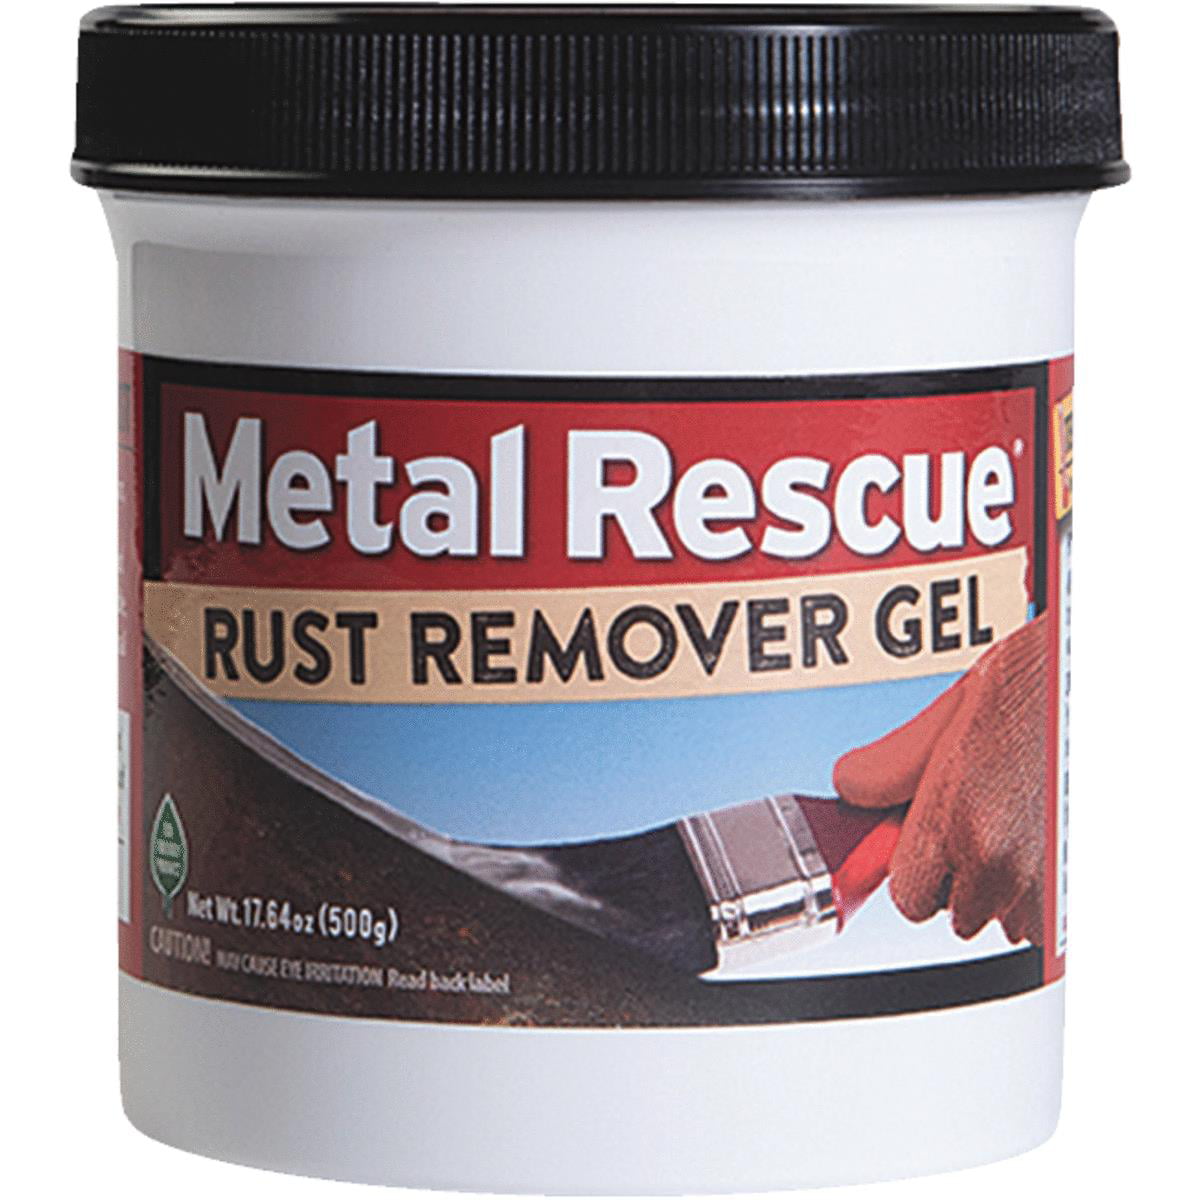 Remover rust from metal фото 113